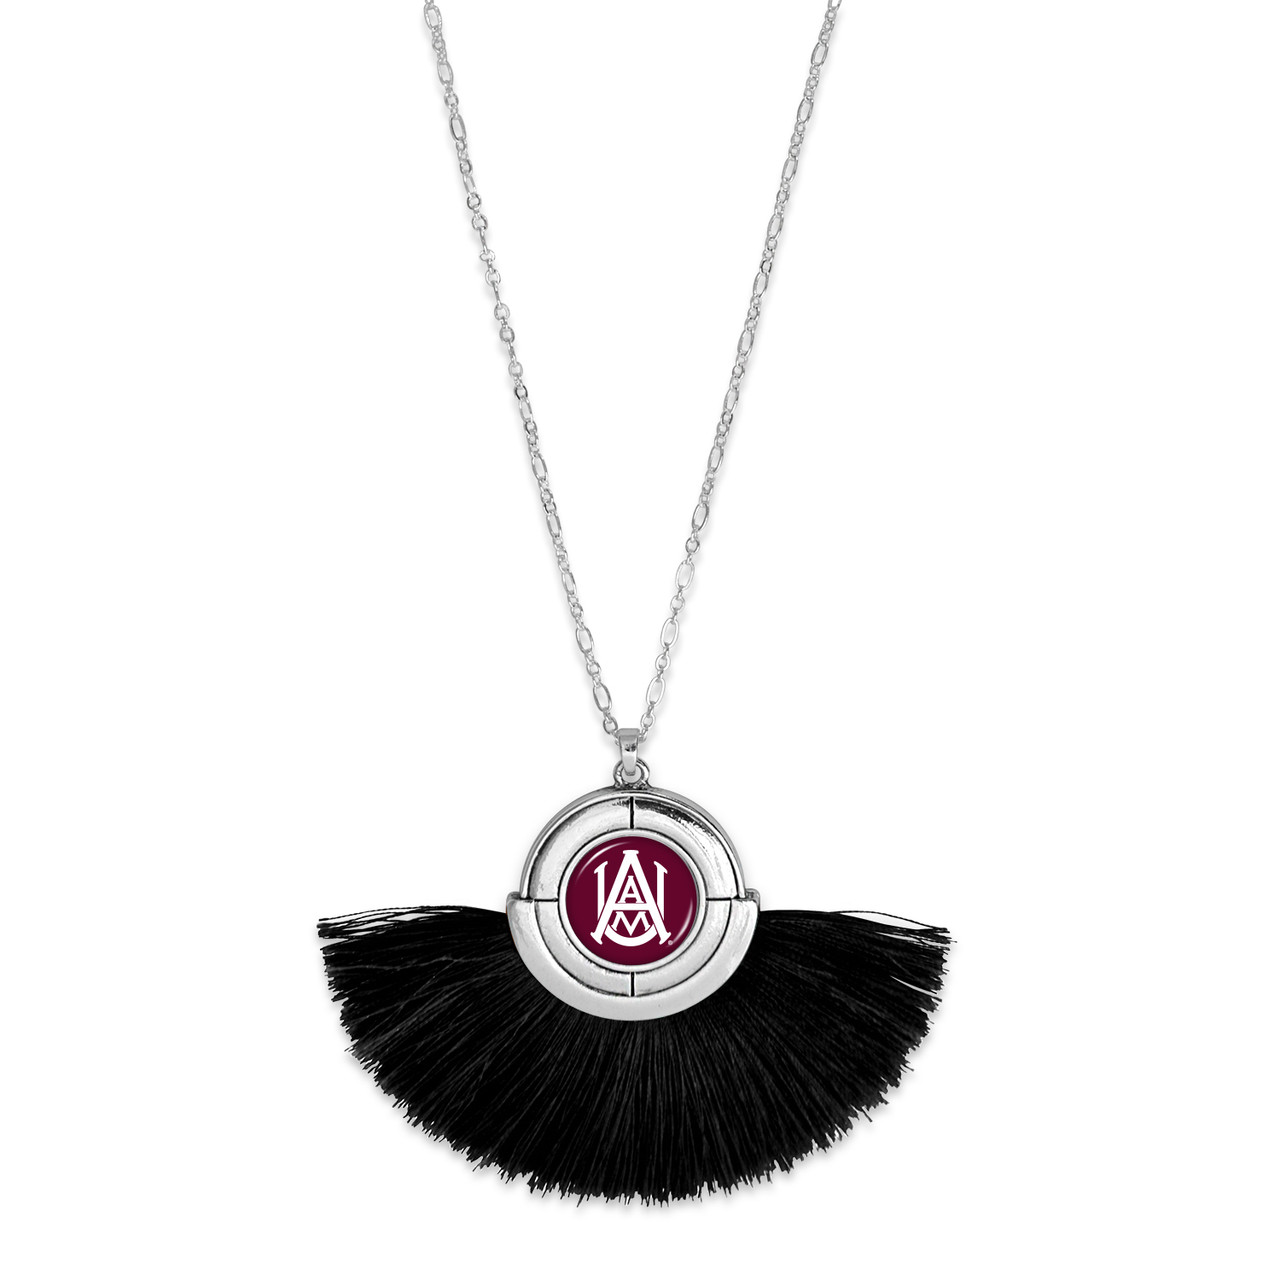 Alabama A&M Bulldogs Necklace- No Strings Attached